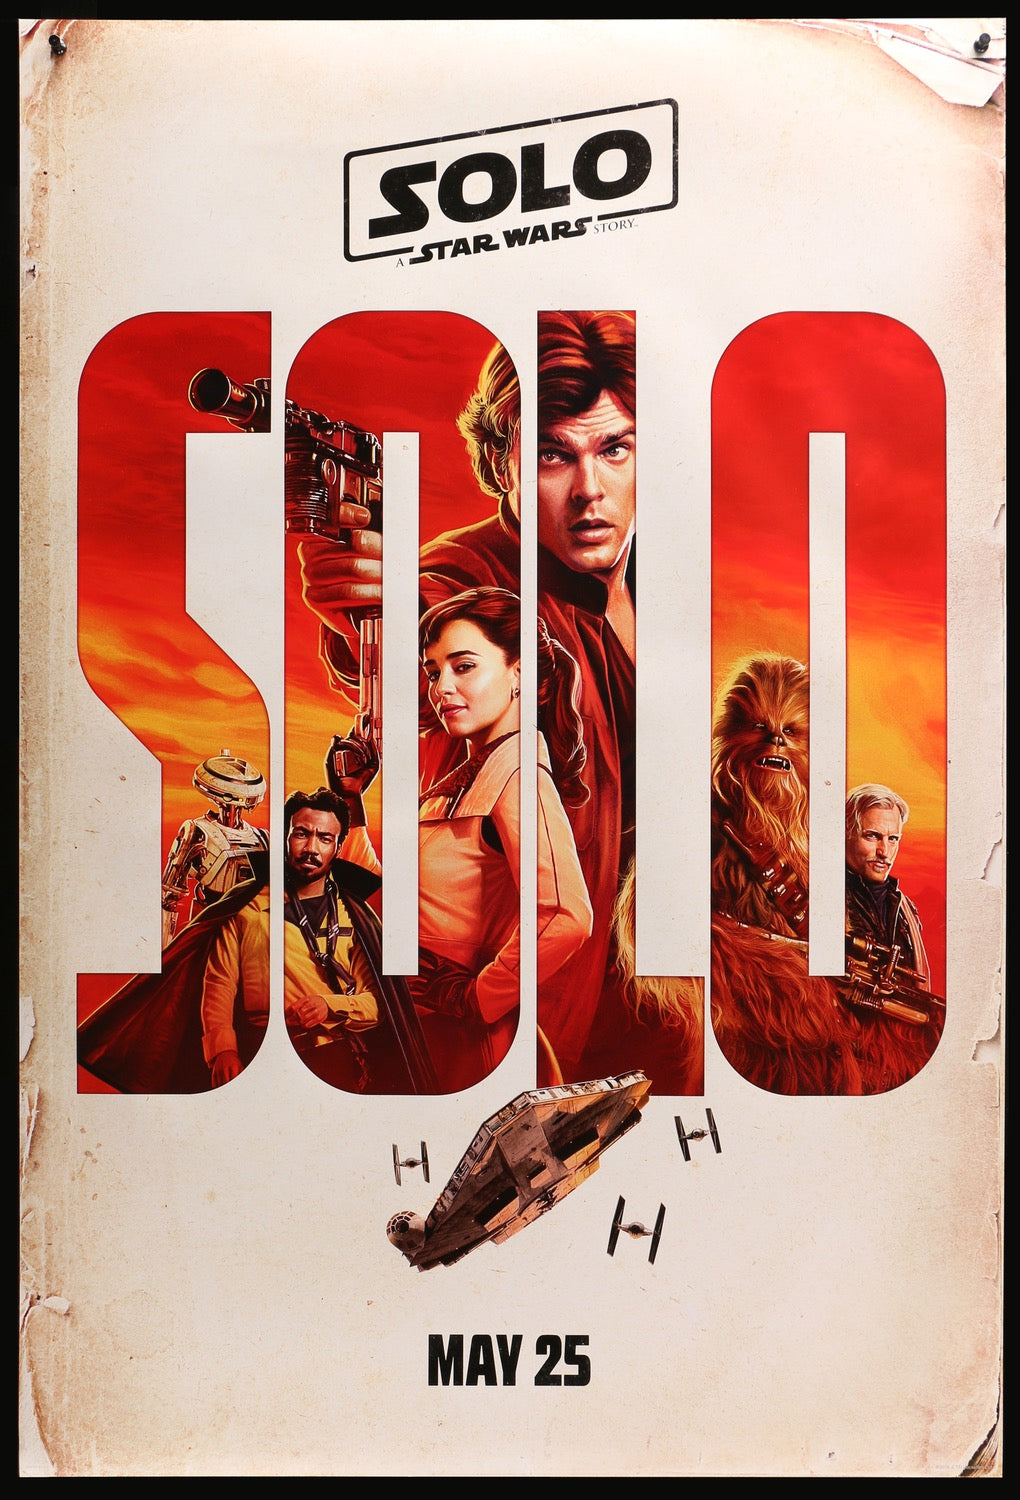 Solo A Star Wars Story 2018 Cover Wallpapers